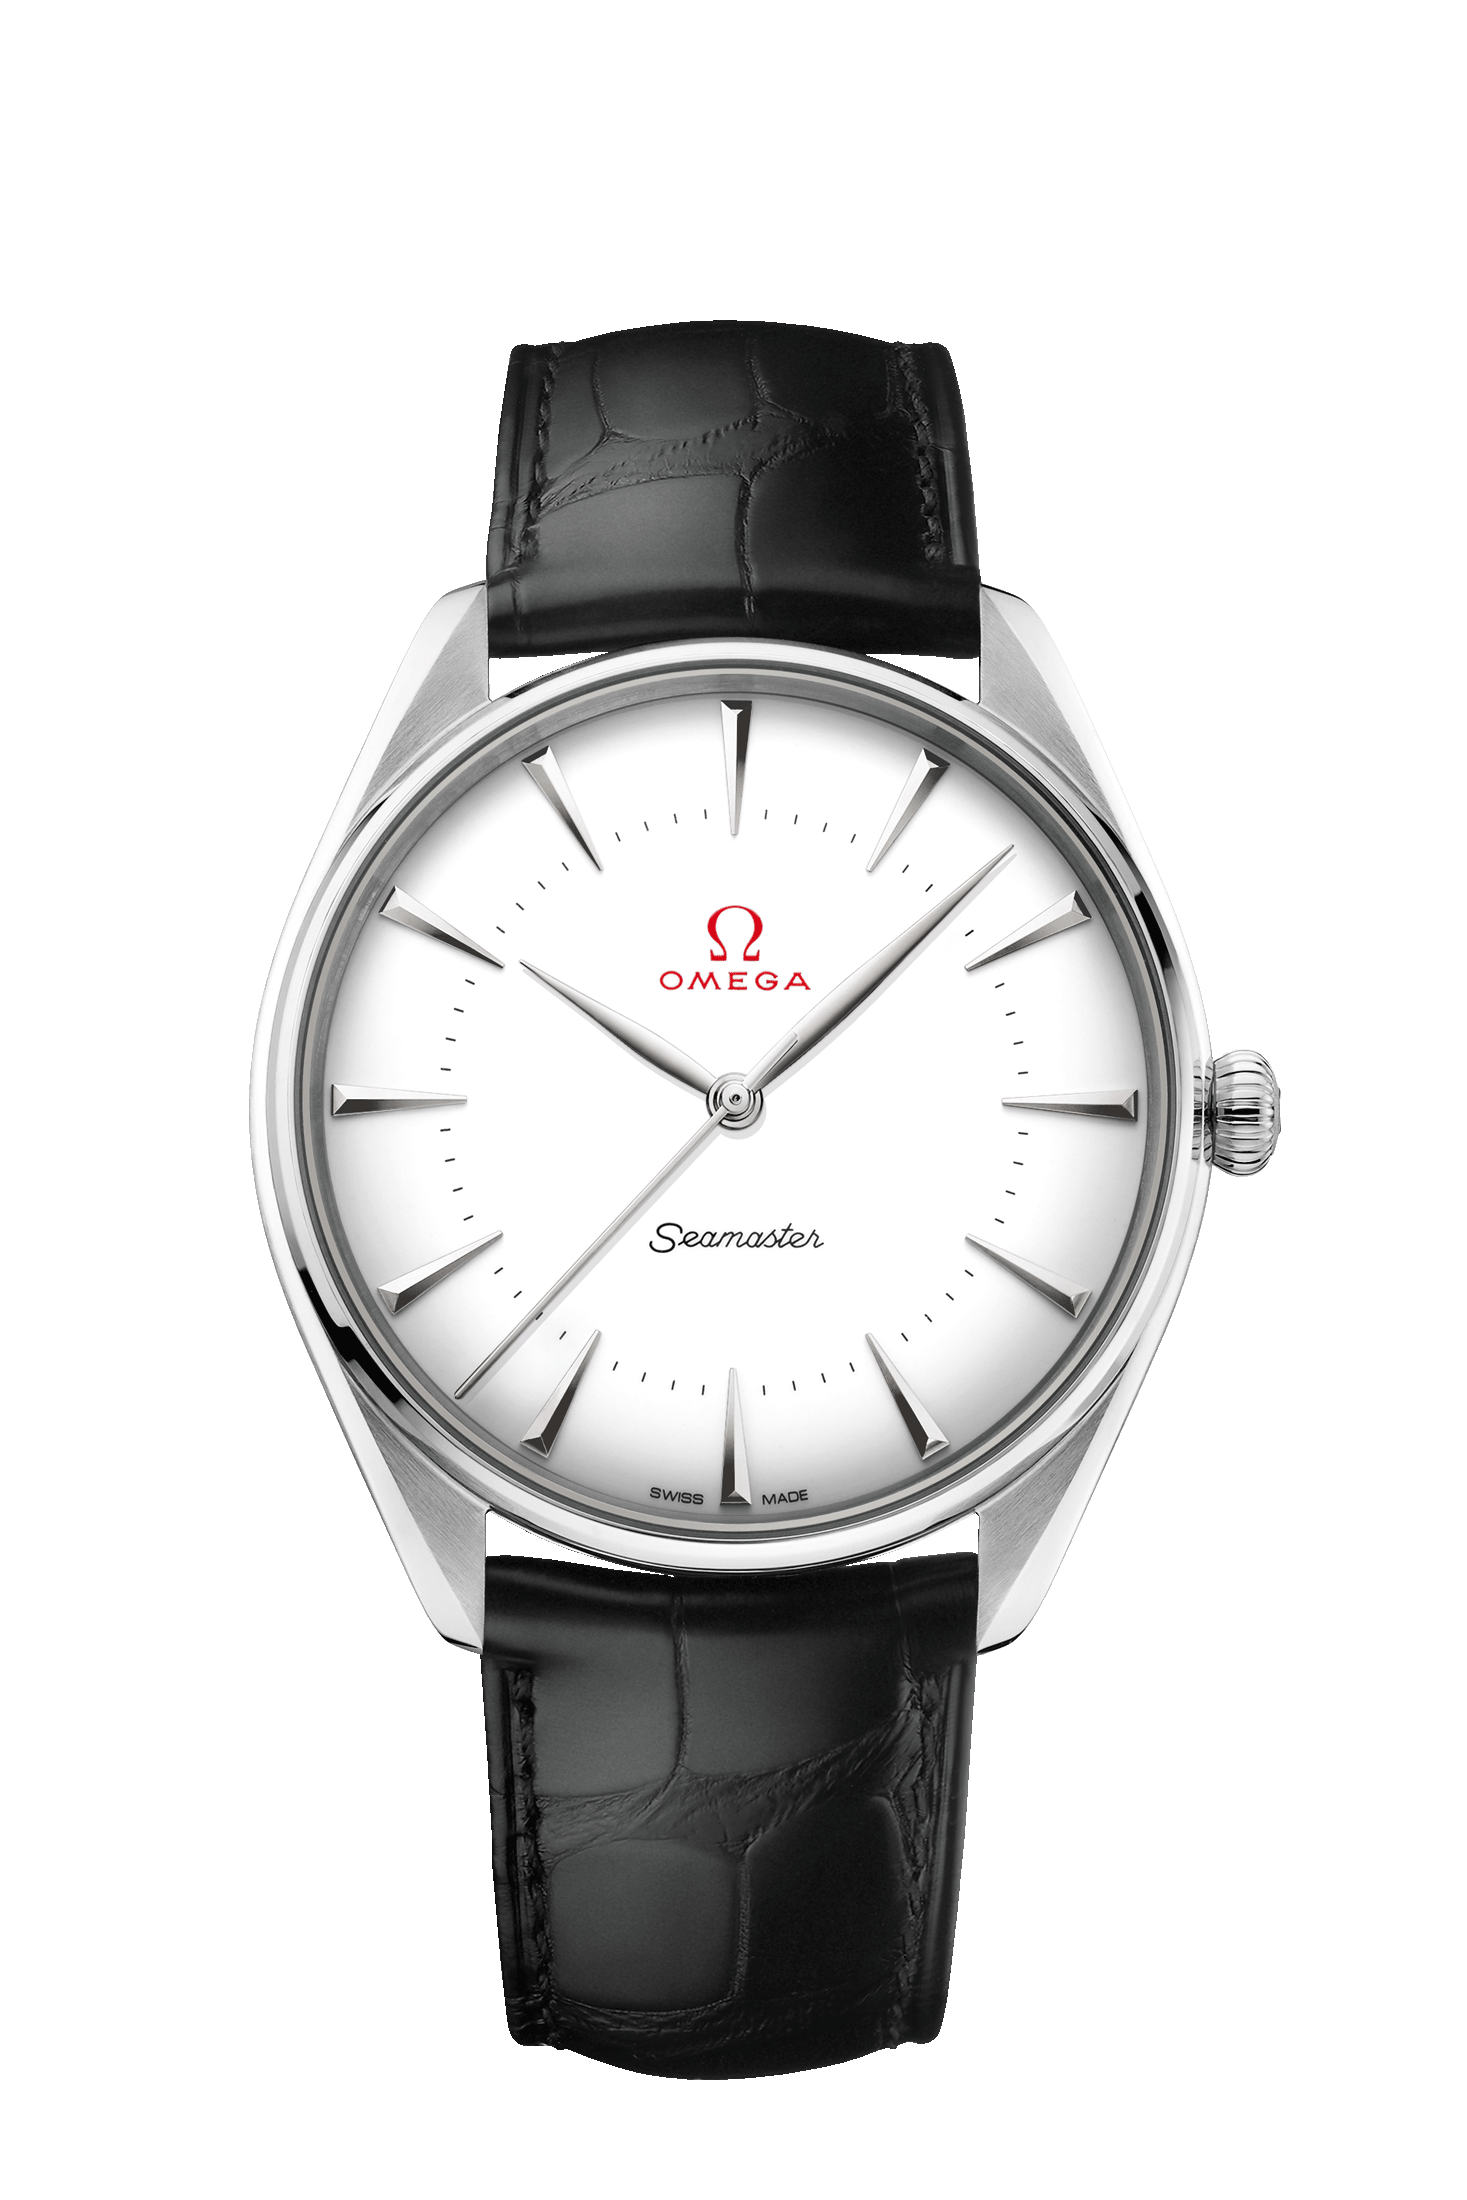 Men's watch / unisex  OMEGA, Seamaster Olympic Official Timekeeper Co-Axial Master Chronometer / 39.50mm, SKU: 522.53.40.20.04.002 | watchapproach.com